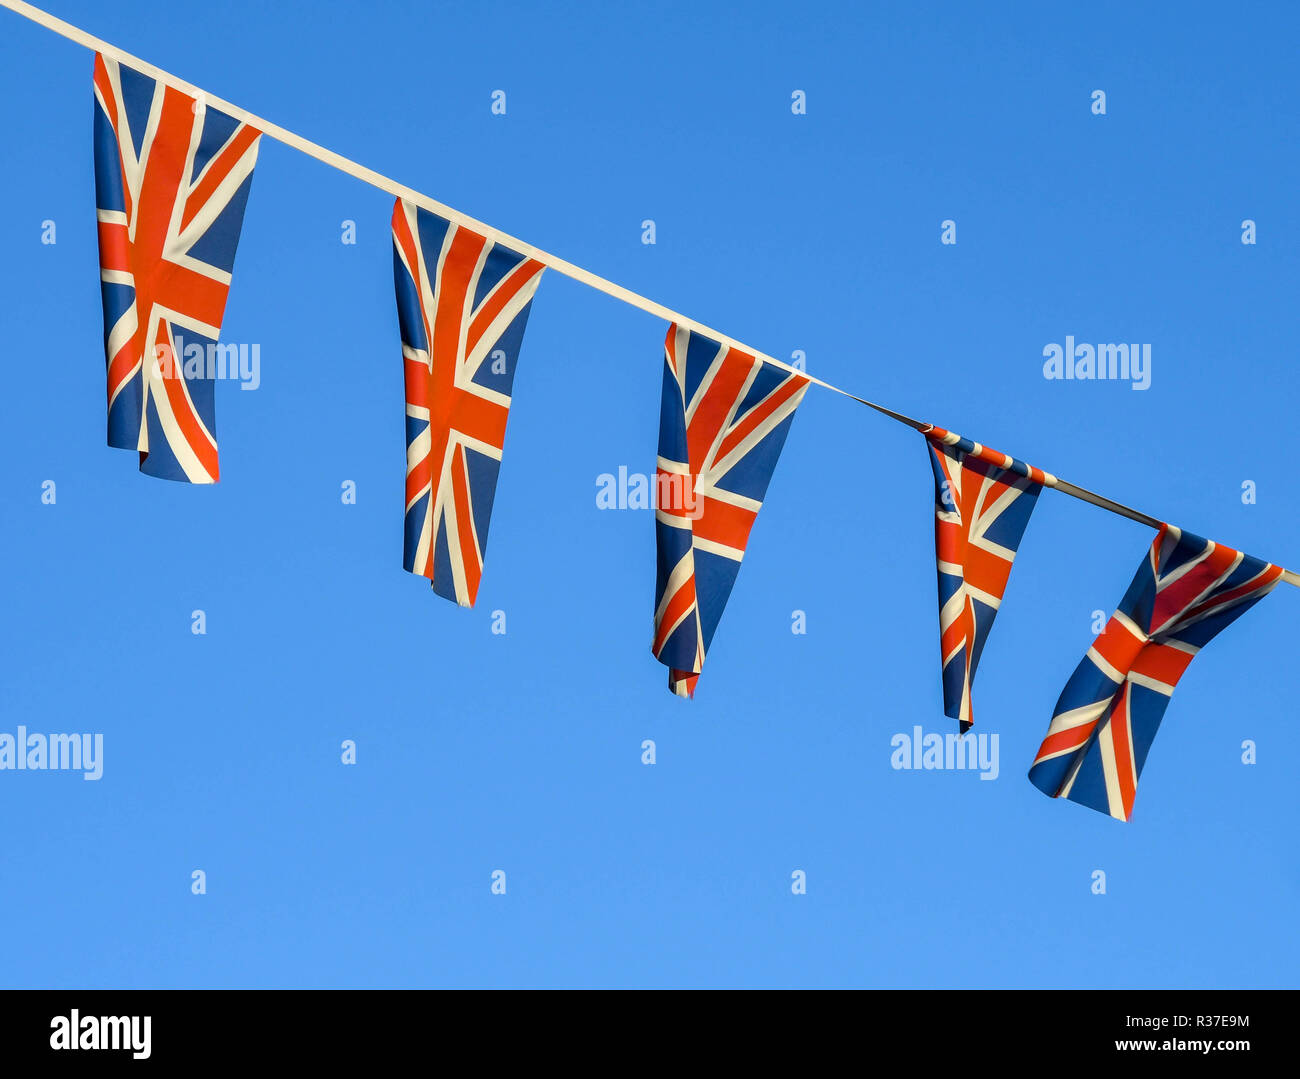 Row of small Union Jack flags fluttering in the wind against a deep blue sky. Stock Photo